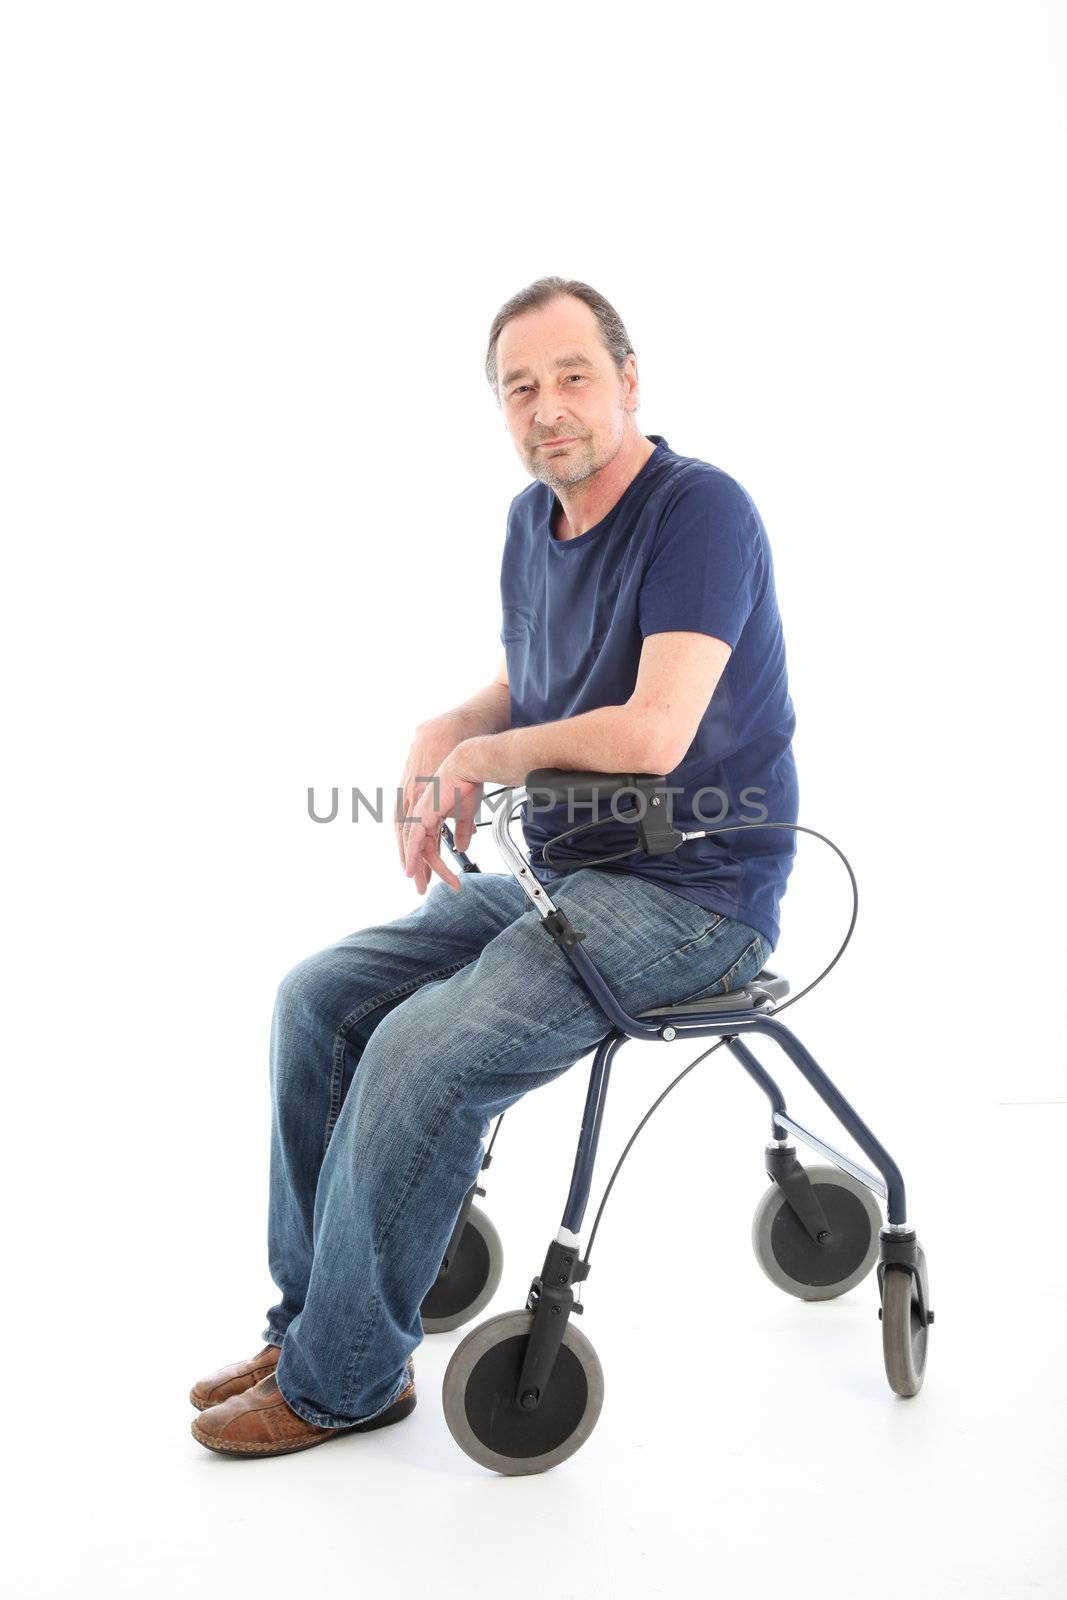 Satisfied middle-aged man resting onthe seat of a health walker which he is using to aid mobility as a result of a disability or injury 